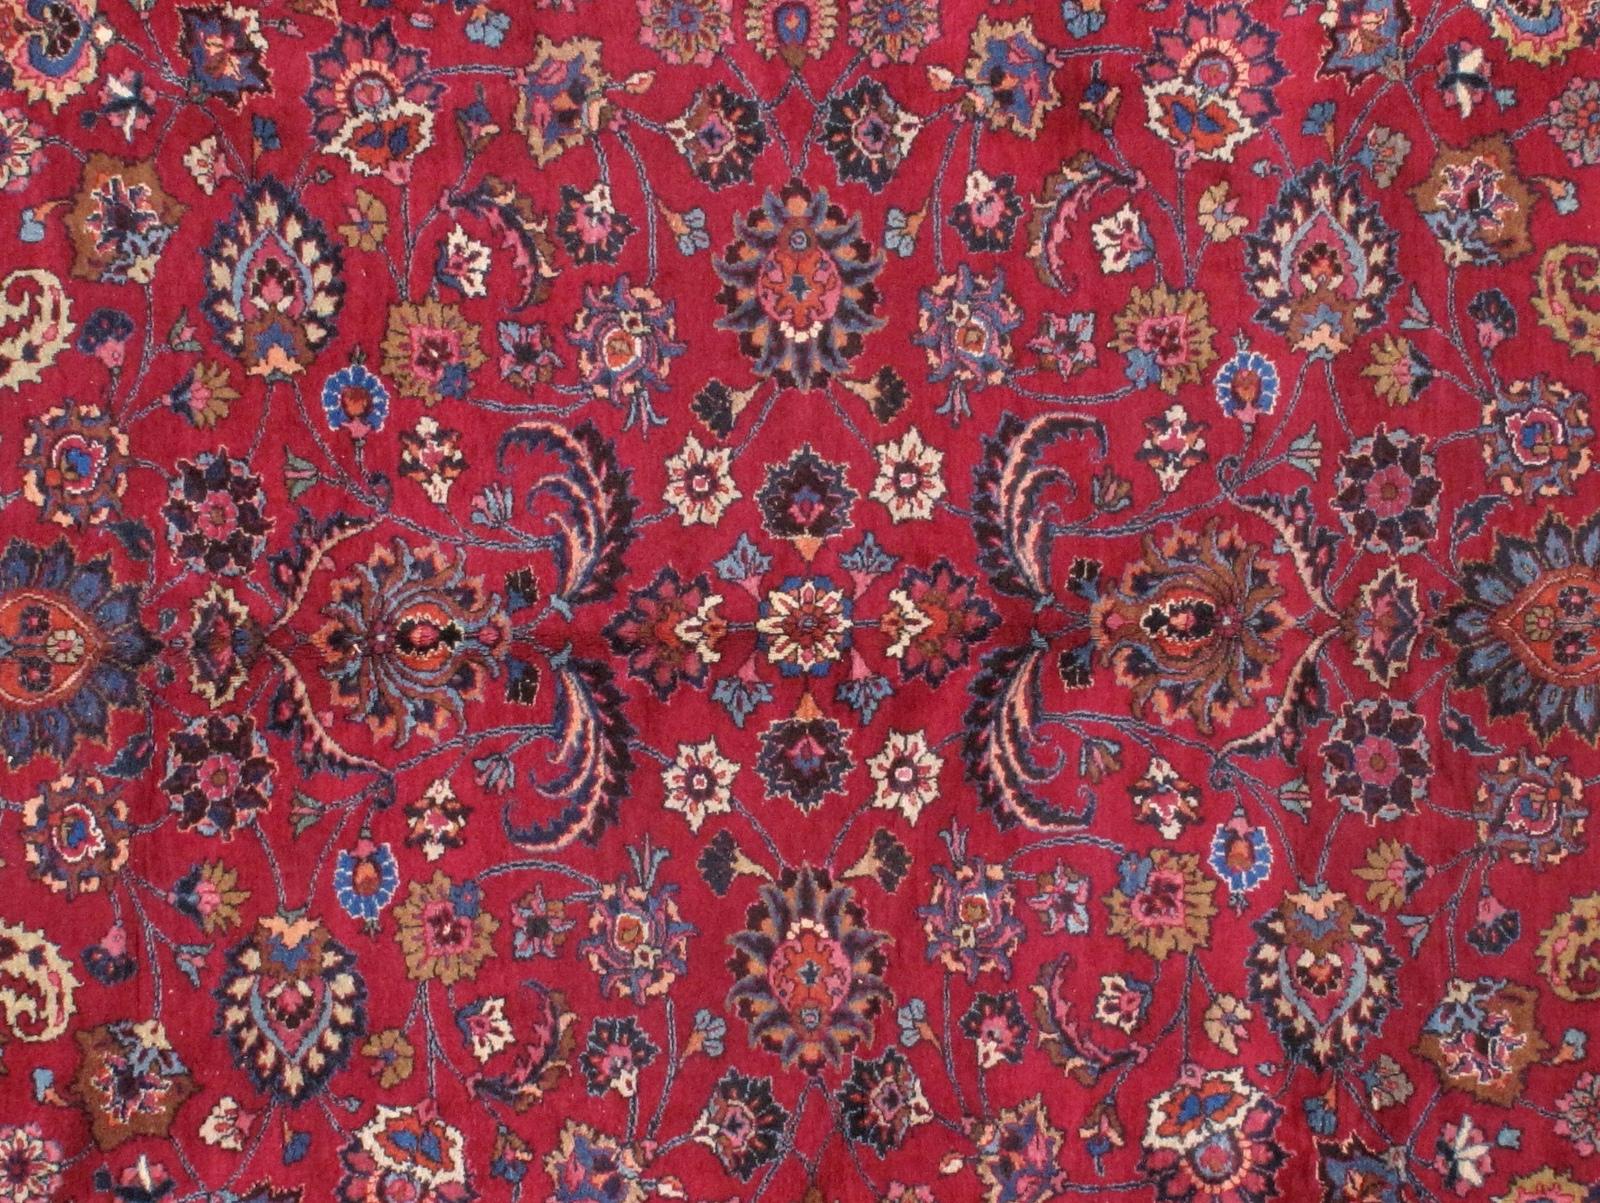 Antique Mashad style rug in original good condition. The field of the rug is in red shade with floral design and navy blue border. Measures: 8.7' x 11' (265 cm x 335 cm).